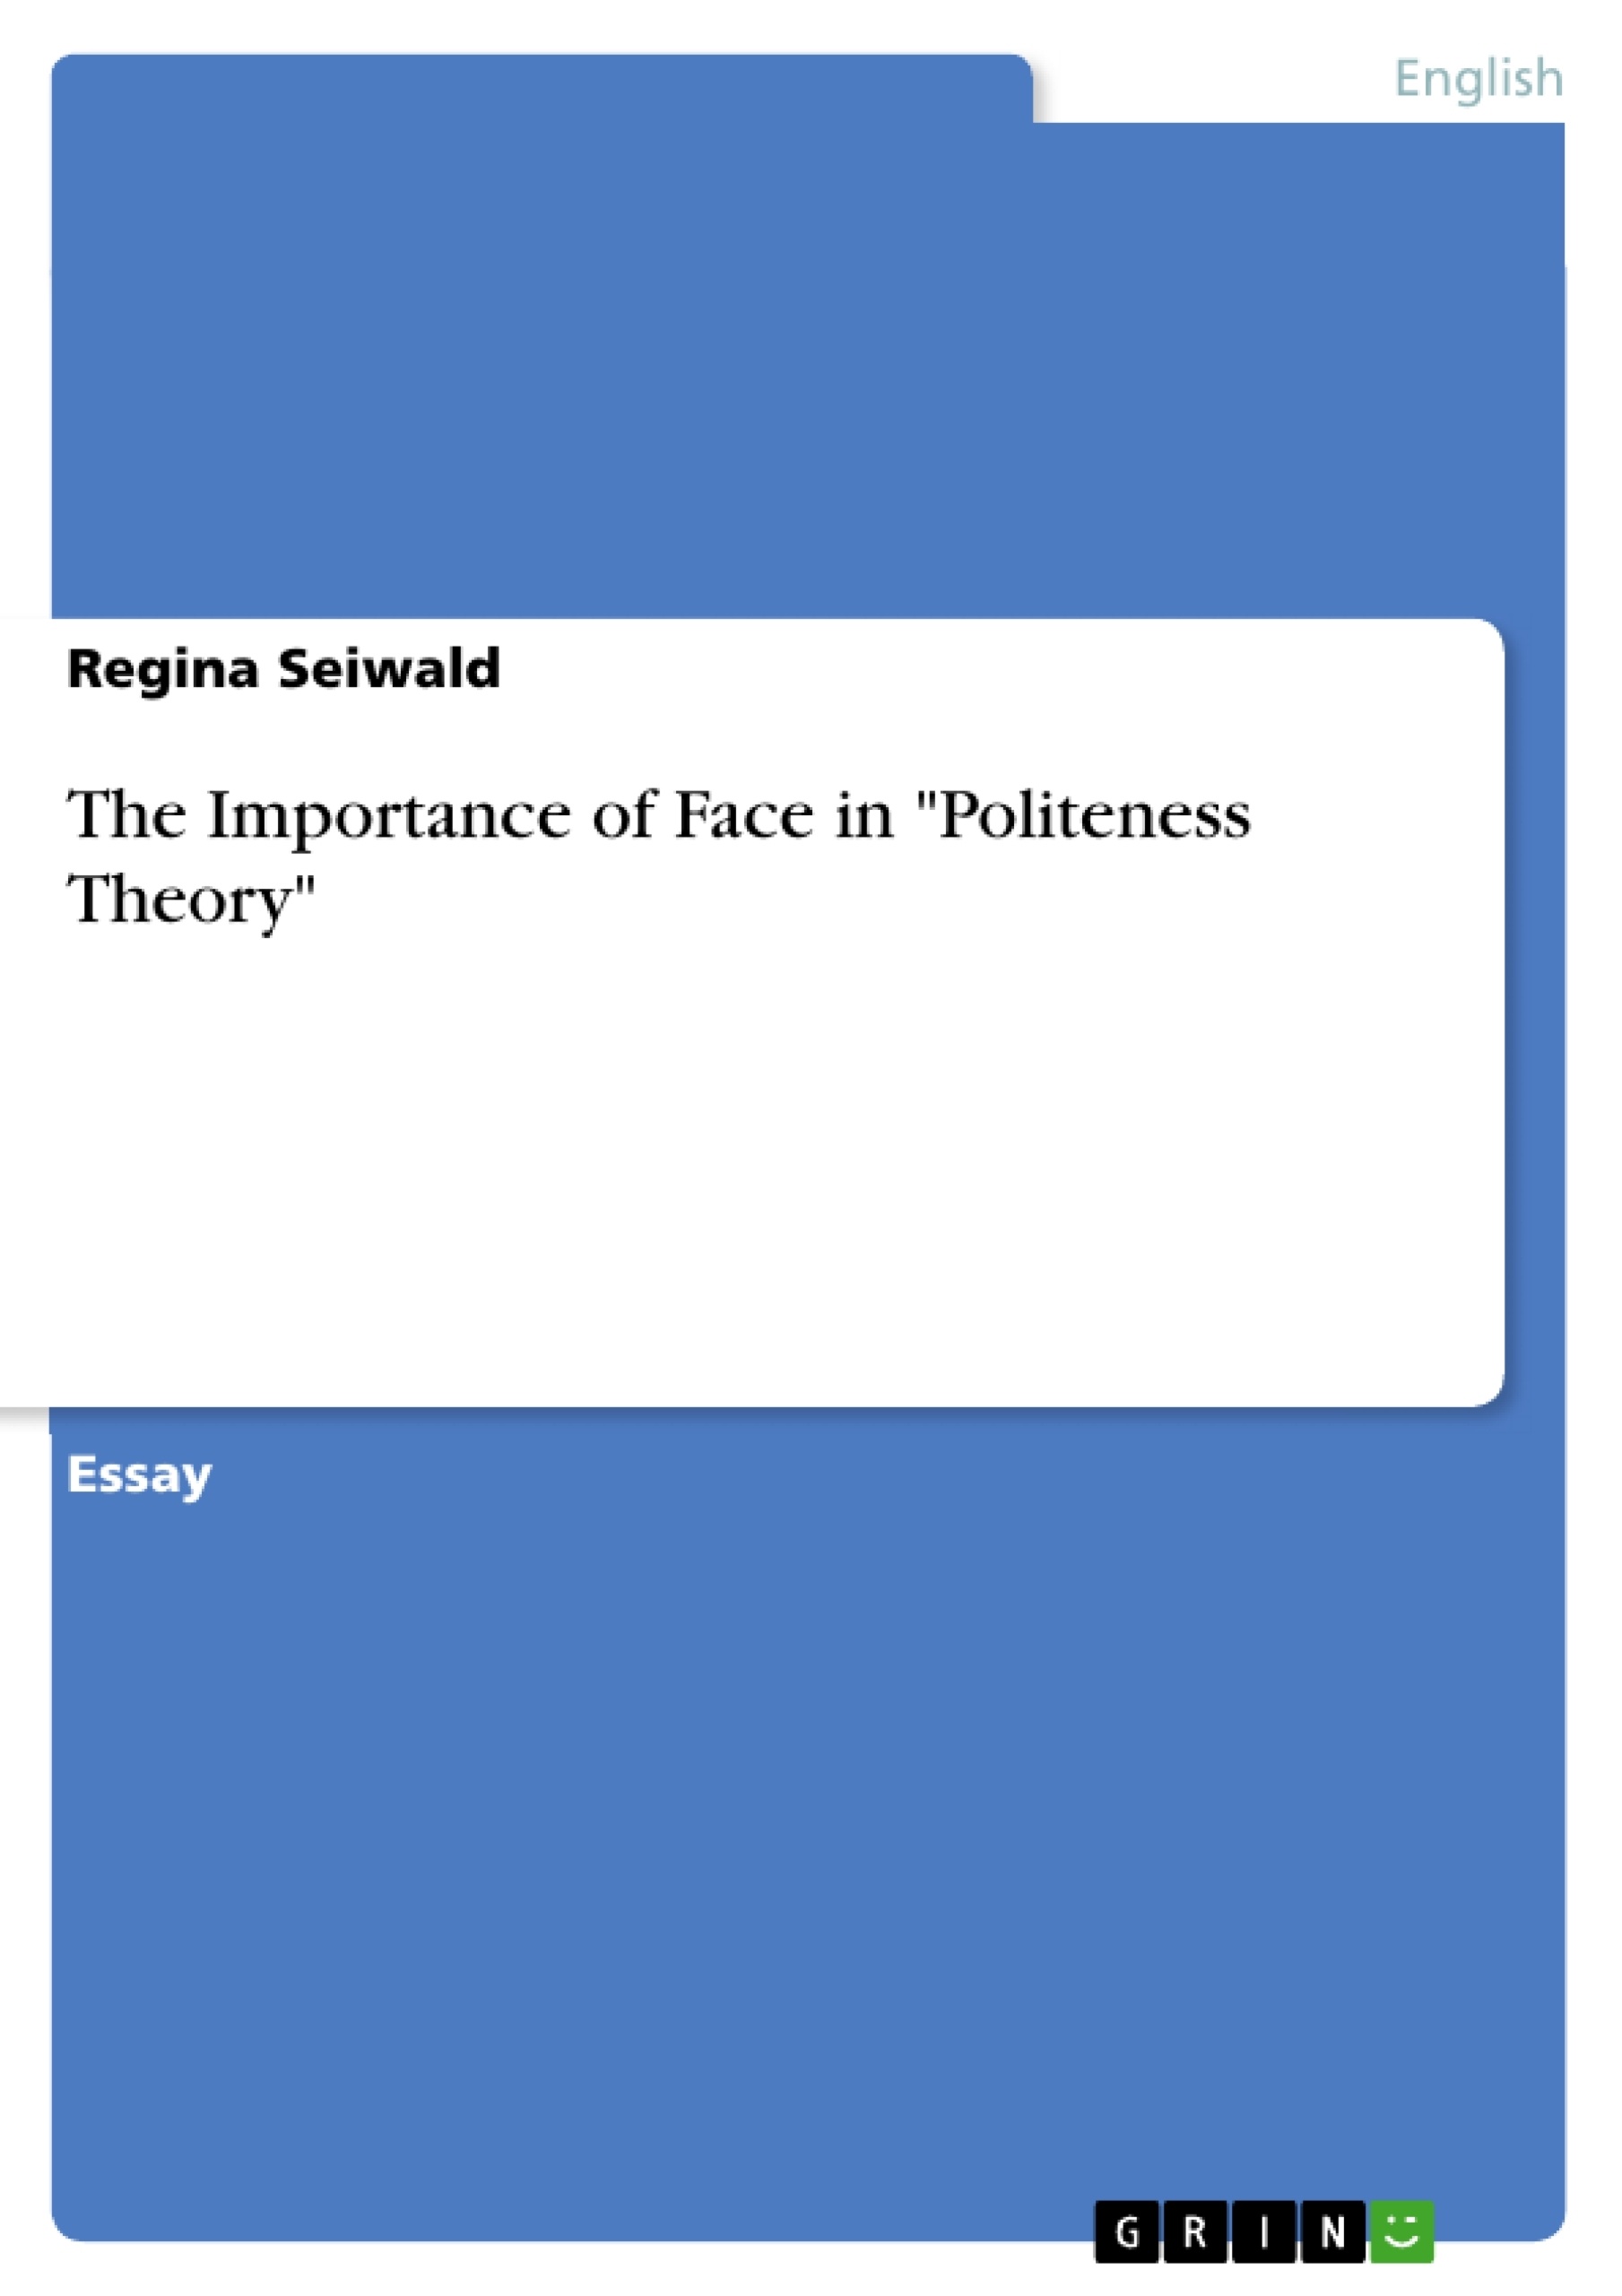 Thesis on politeness theory